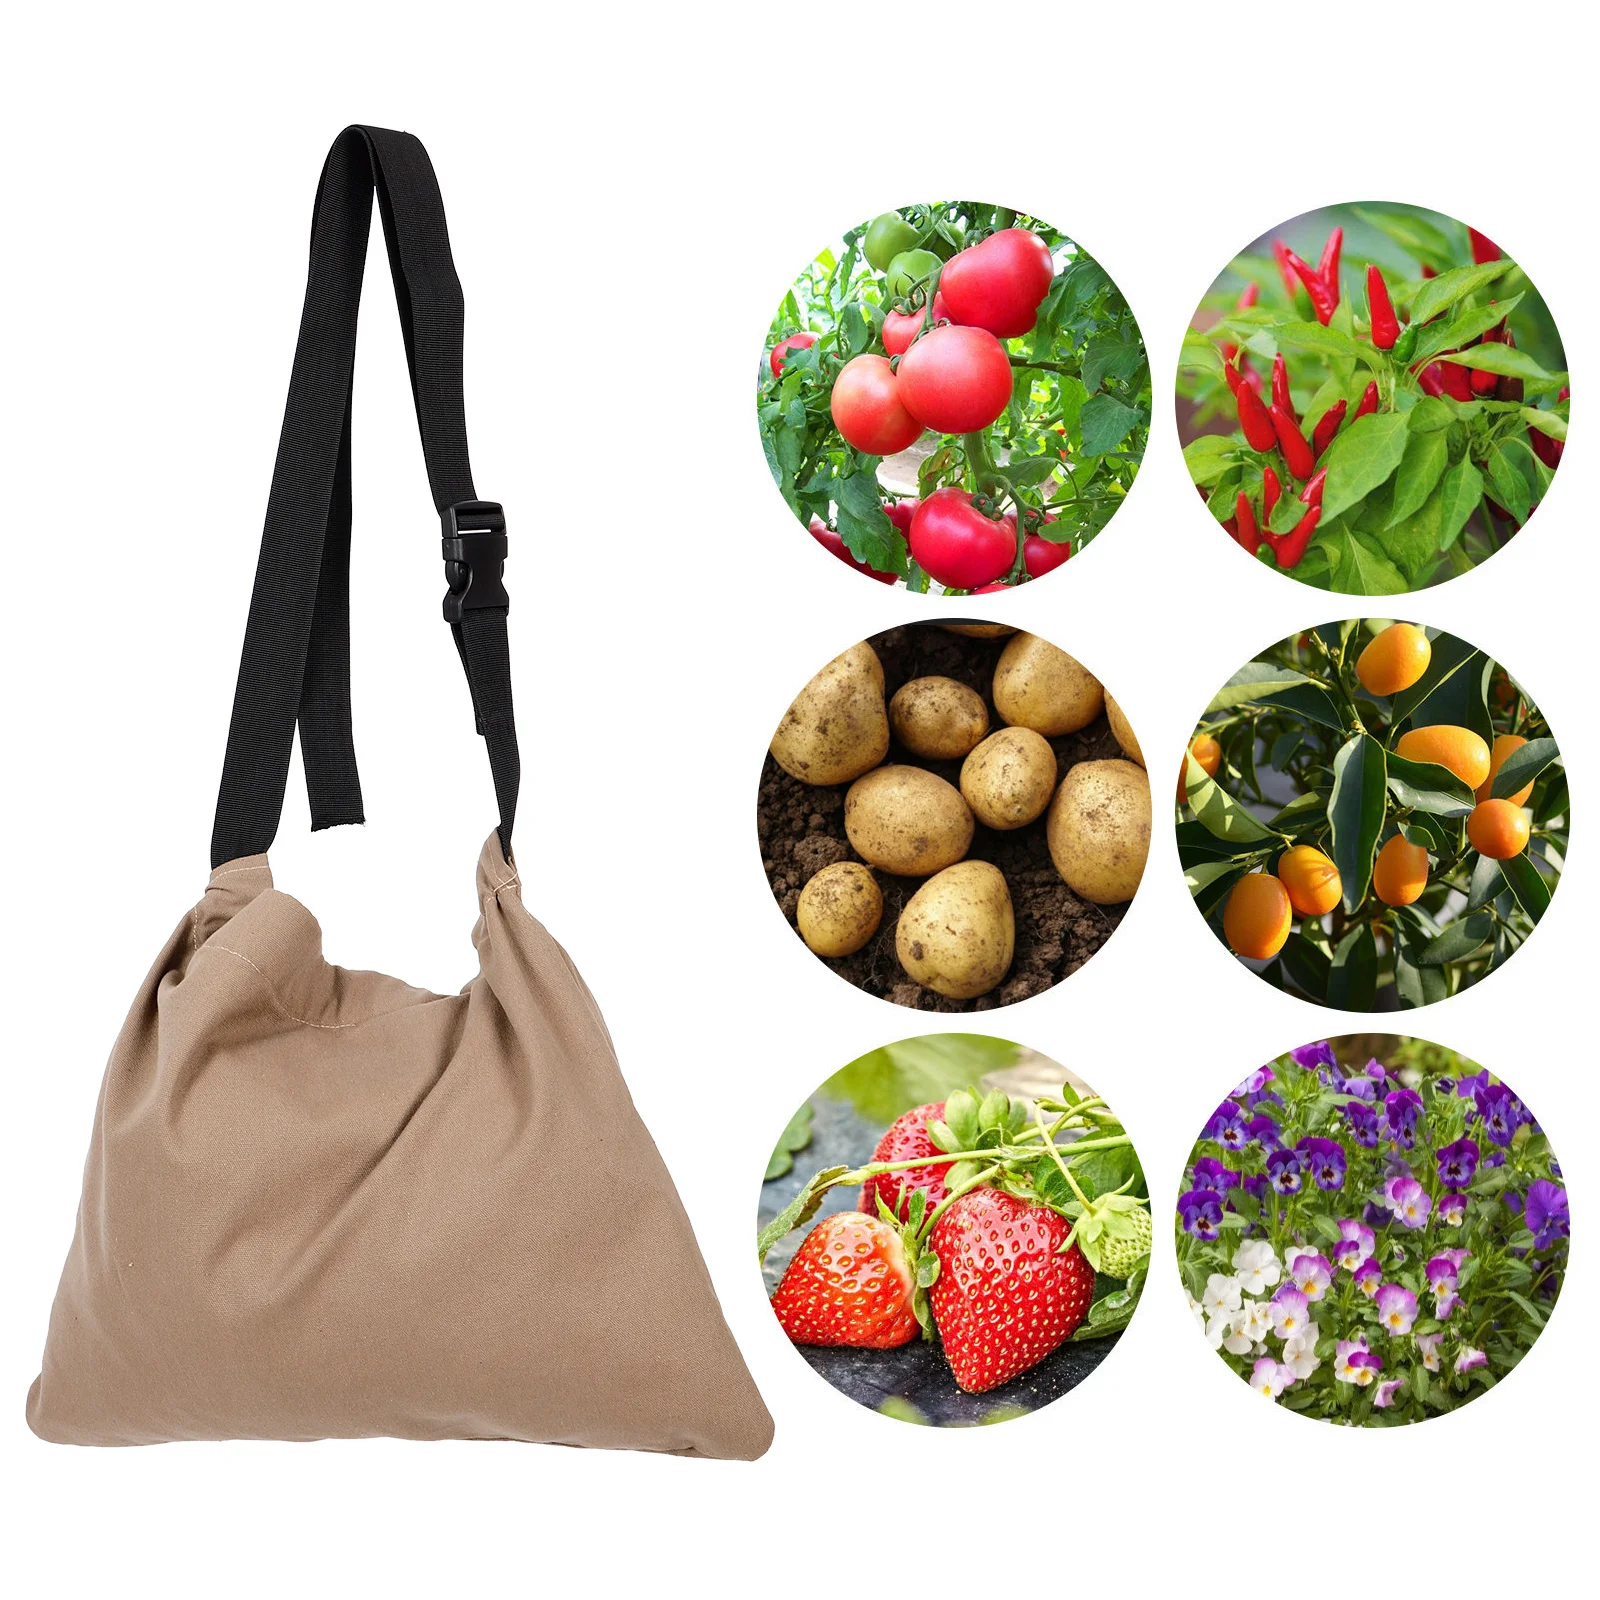 

Fruit and Vegetable Picking Bags Gardening Apron Aprons Harvest Mushroom Foraging Pouch Hunting up